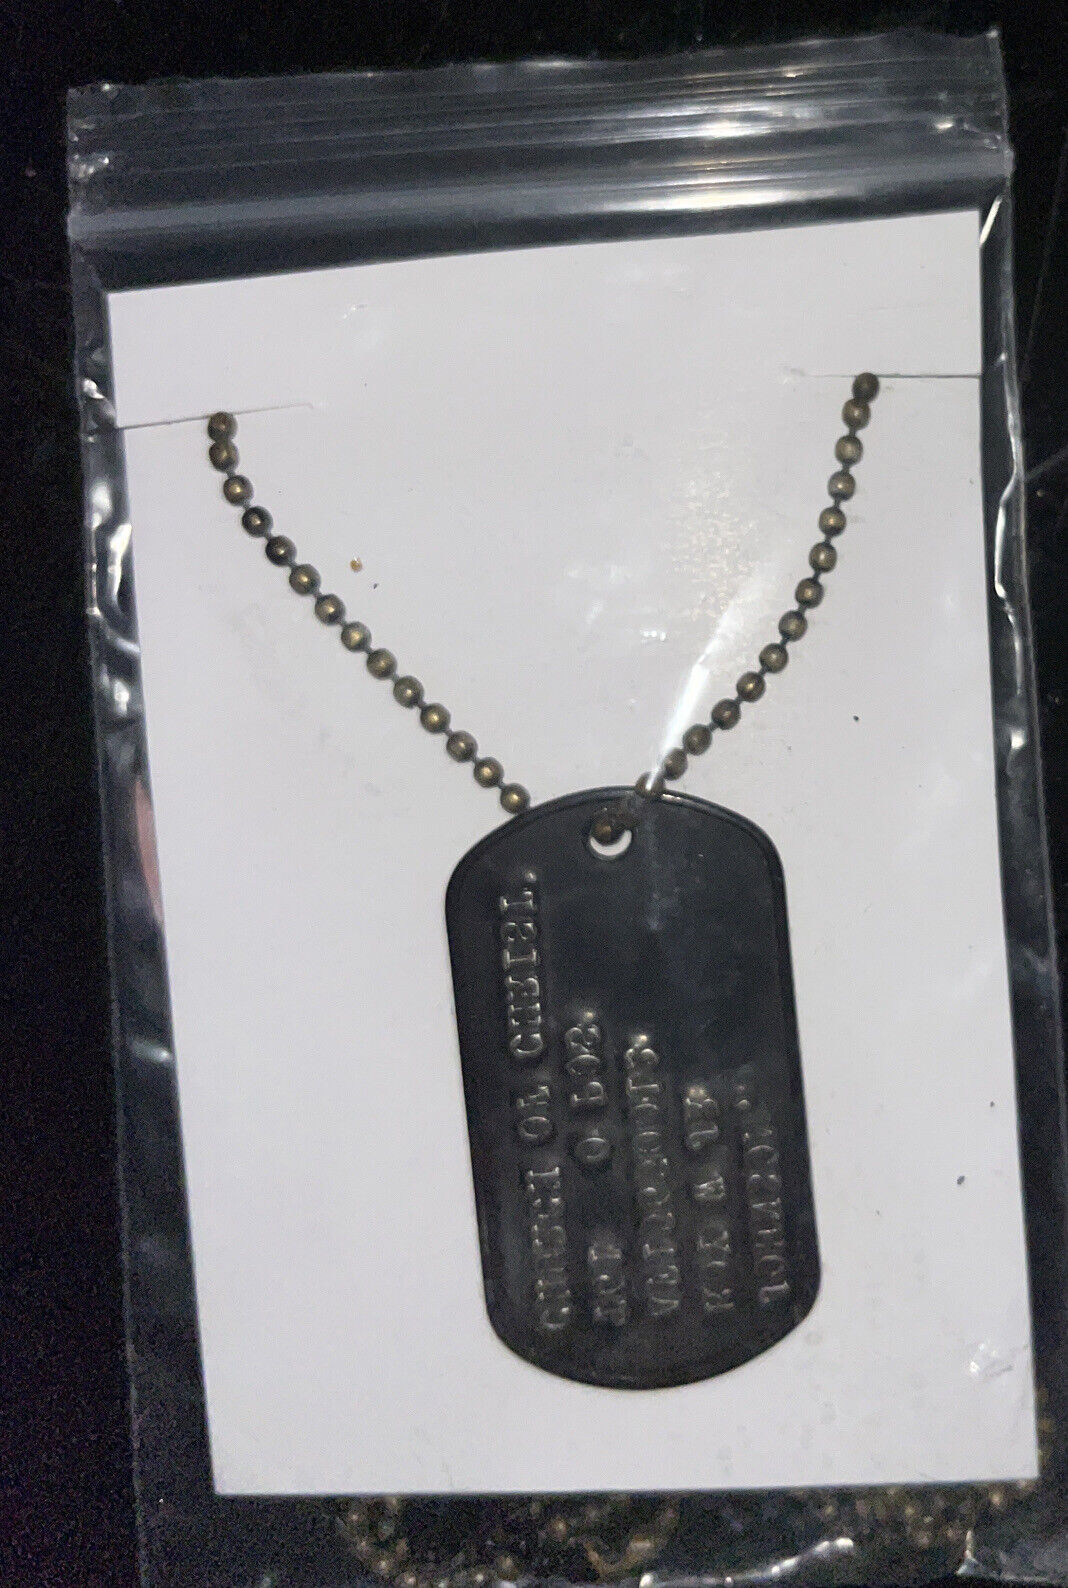 EMBOSSED STAMPED GENUINE MILITARY DOG TAGS, MADE ON MILITARY MACHINE